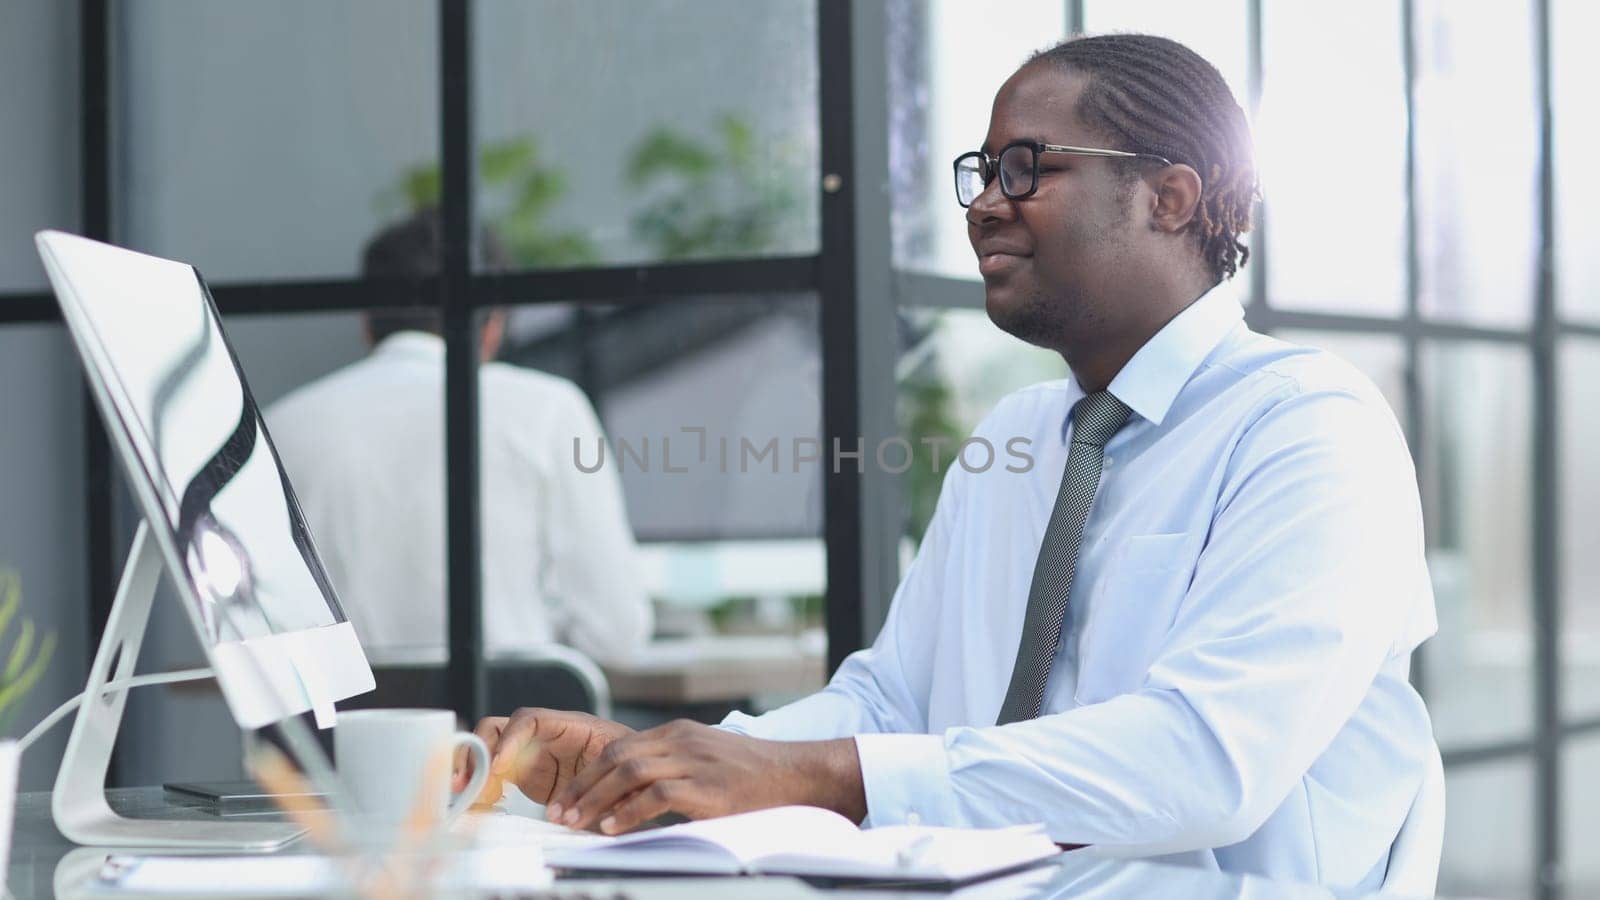 portrait of a man at his workplace at the table in front of the computer smiling.